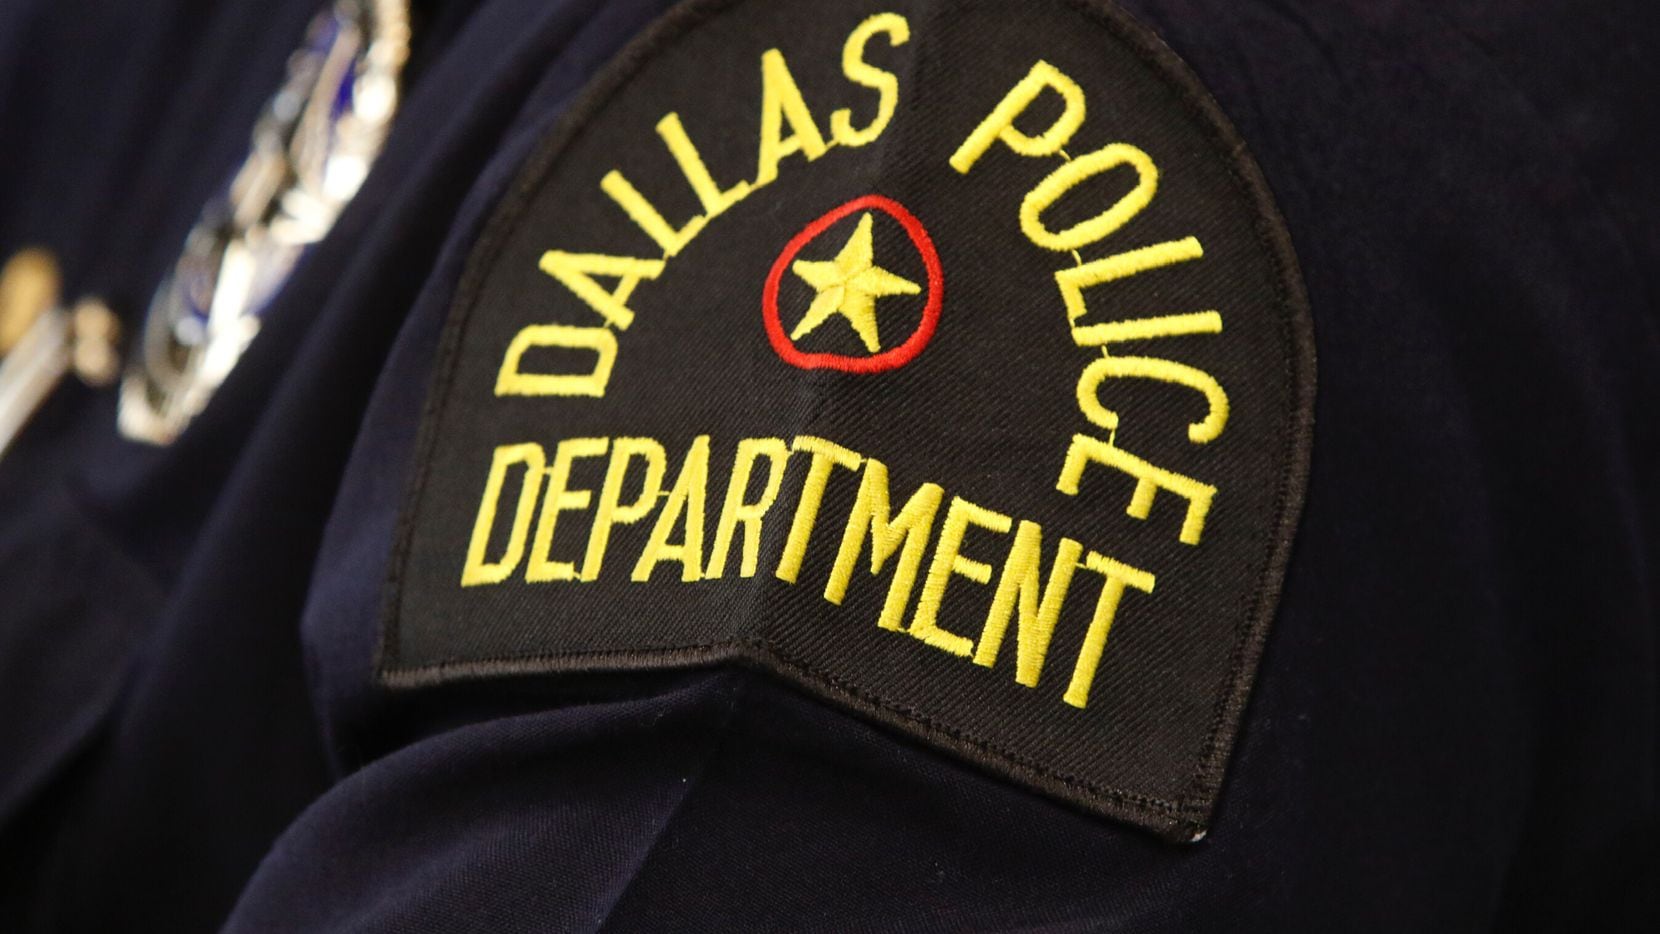 The new coronavirus-questioning by Dallas 911 call takers is geared toward keeping officers safe and preventing the spread of the disease, the department says.